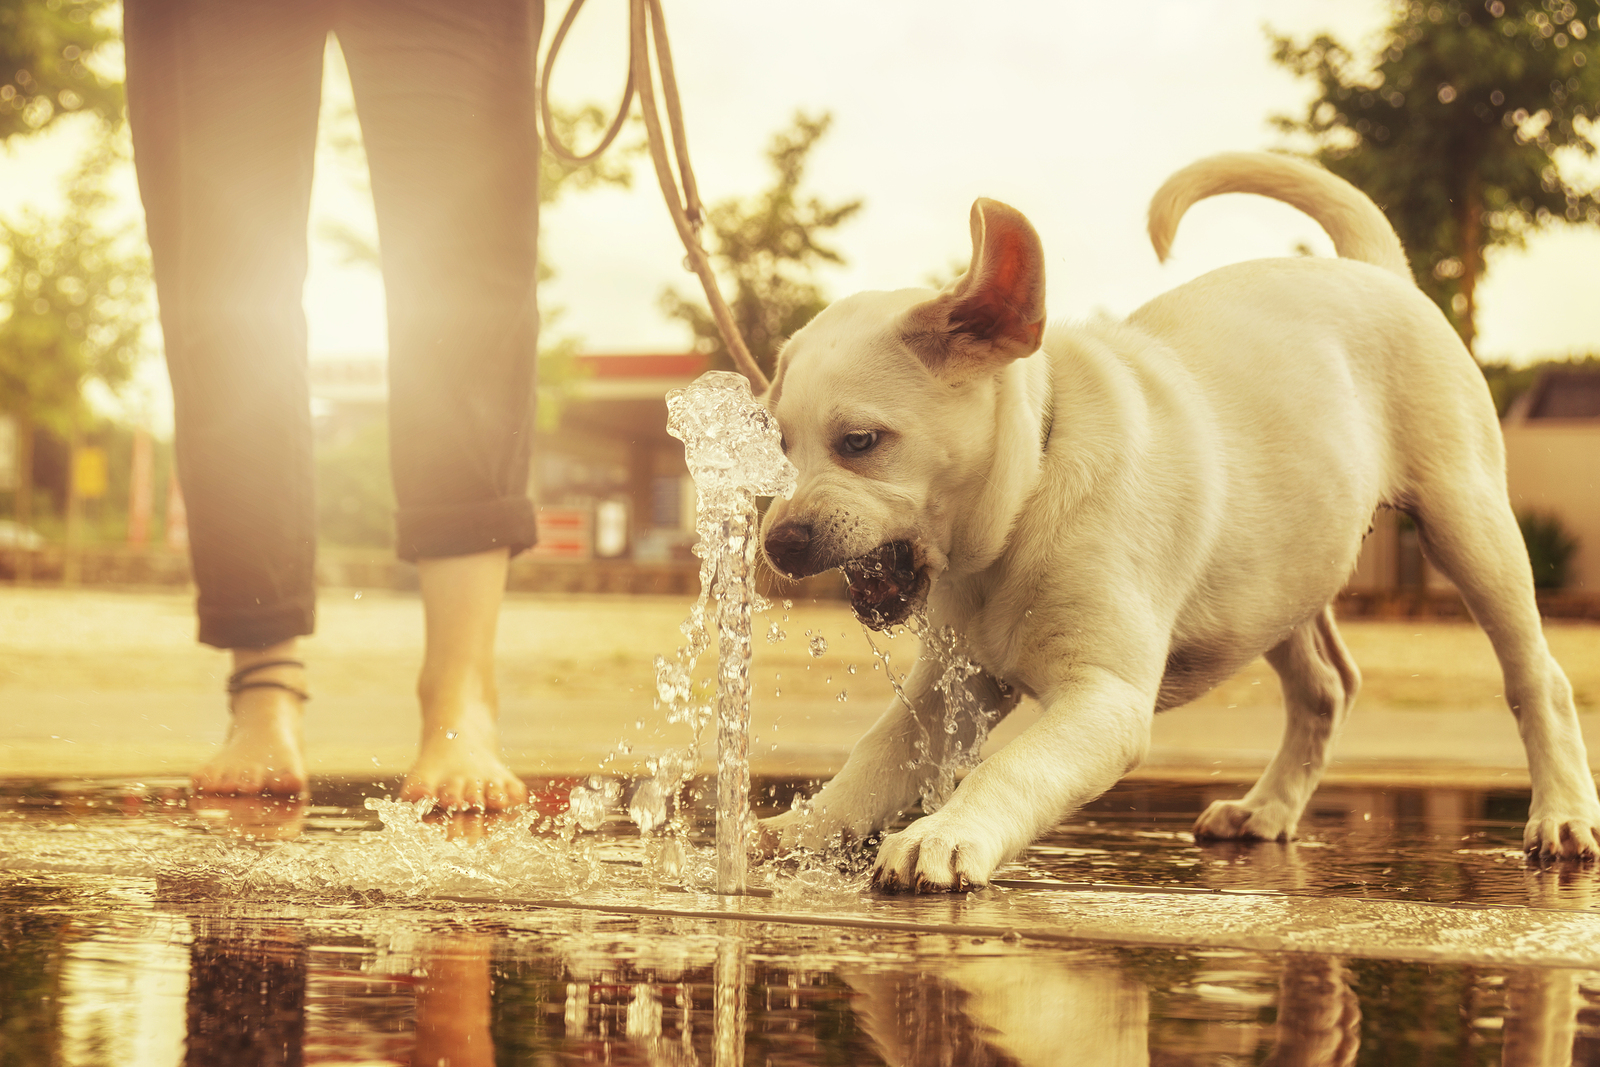 Hot temperature safety tips for dogs